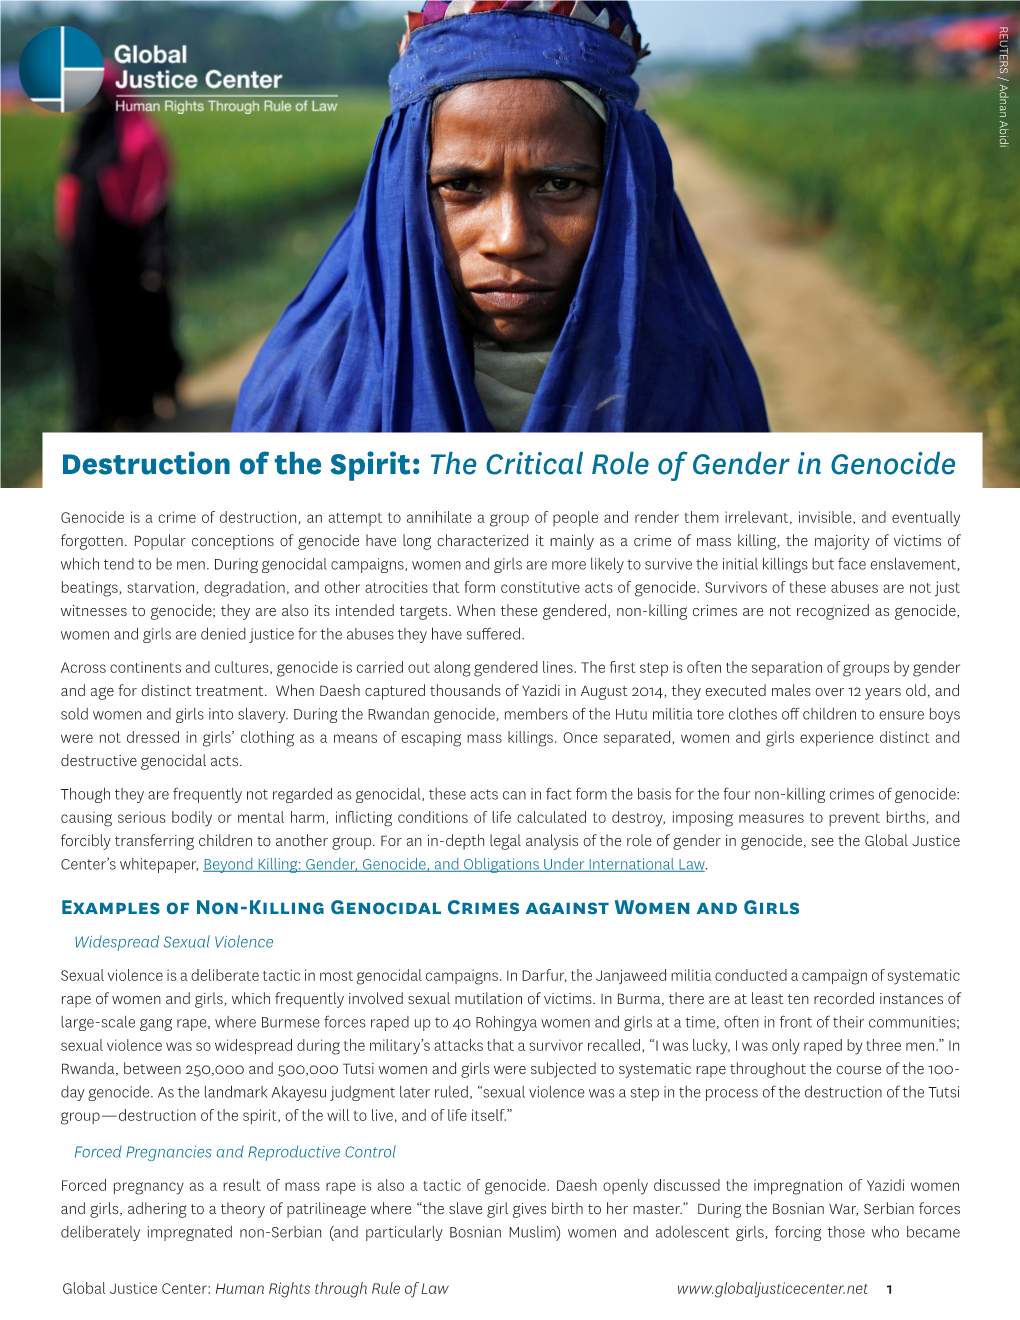 Destruction of the Spirit: the Critical Role of Gender in Genocide